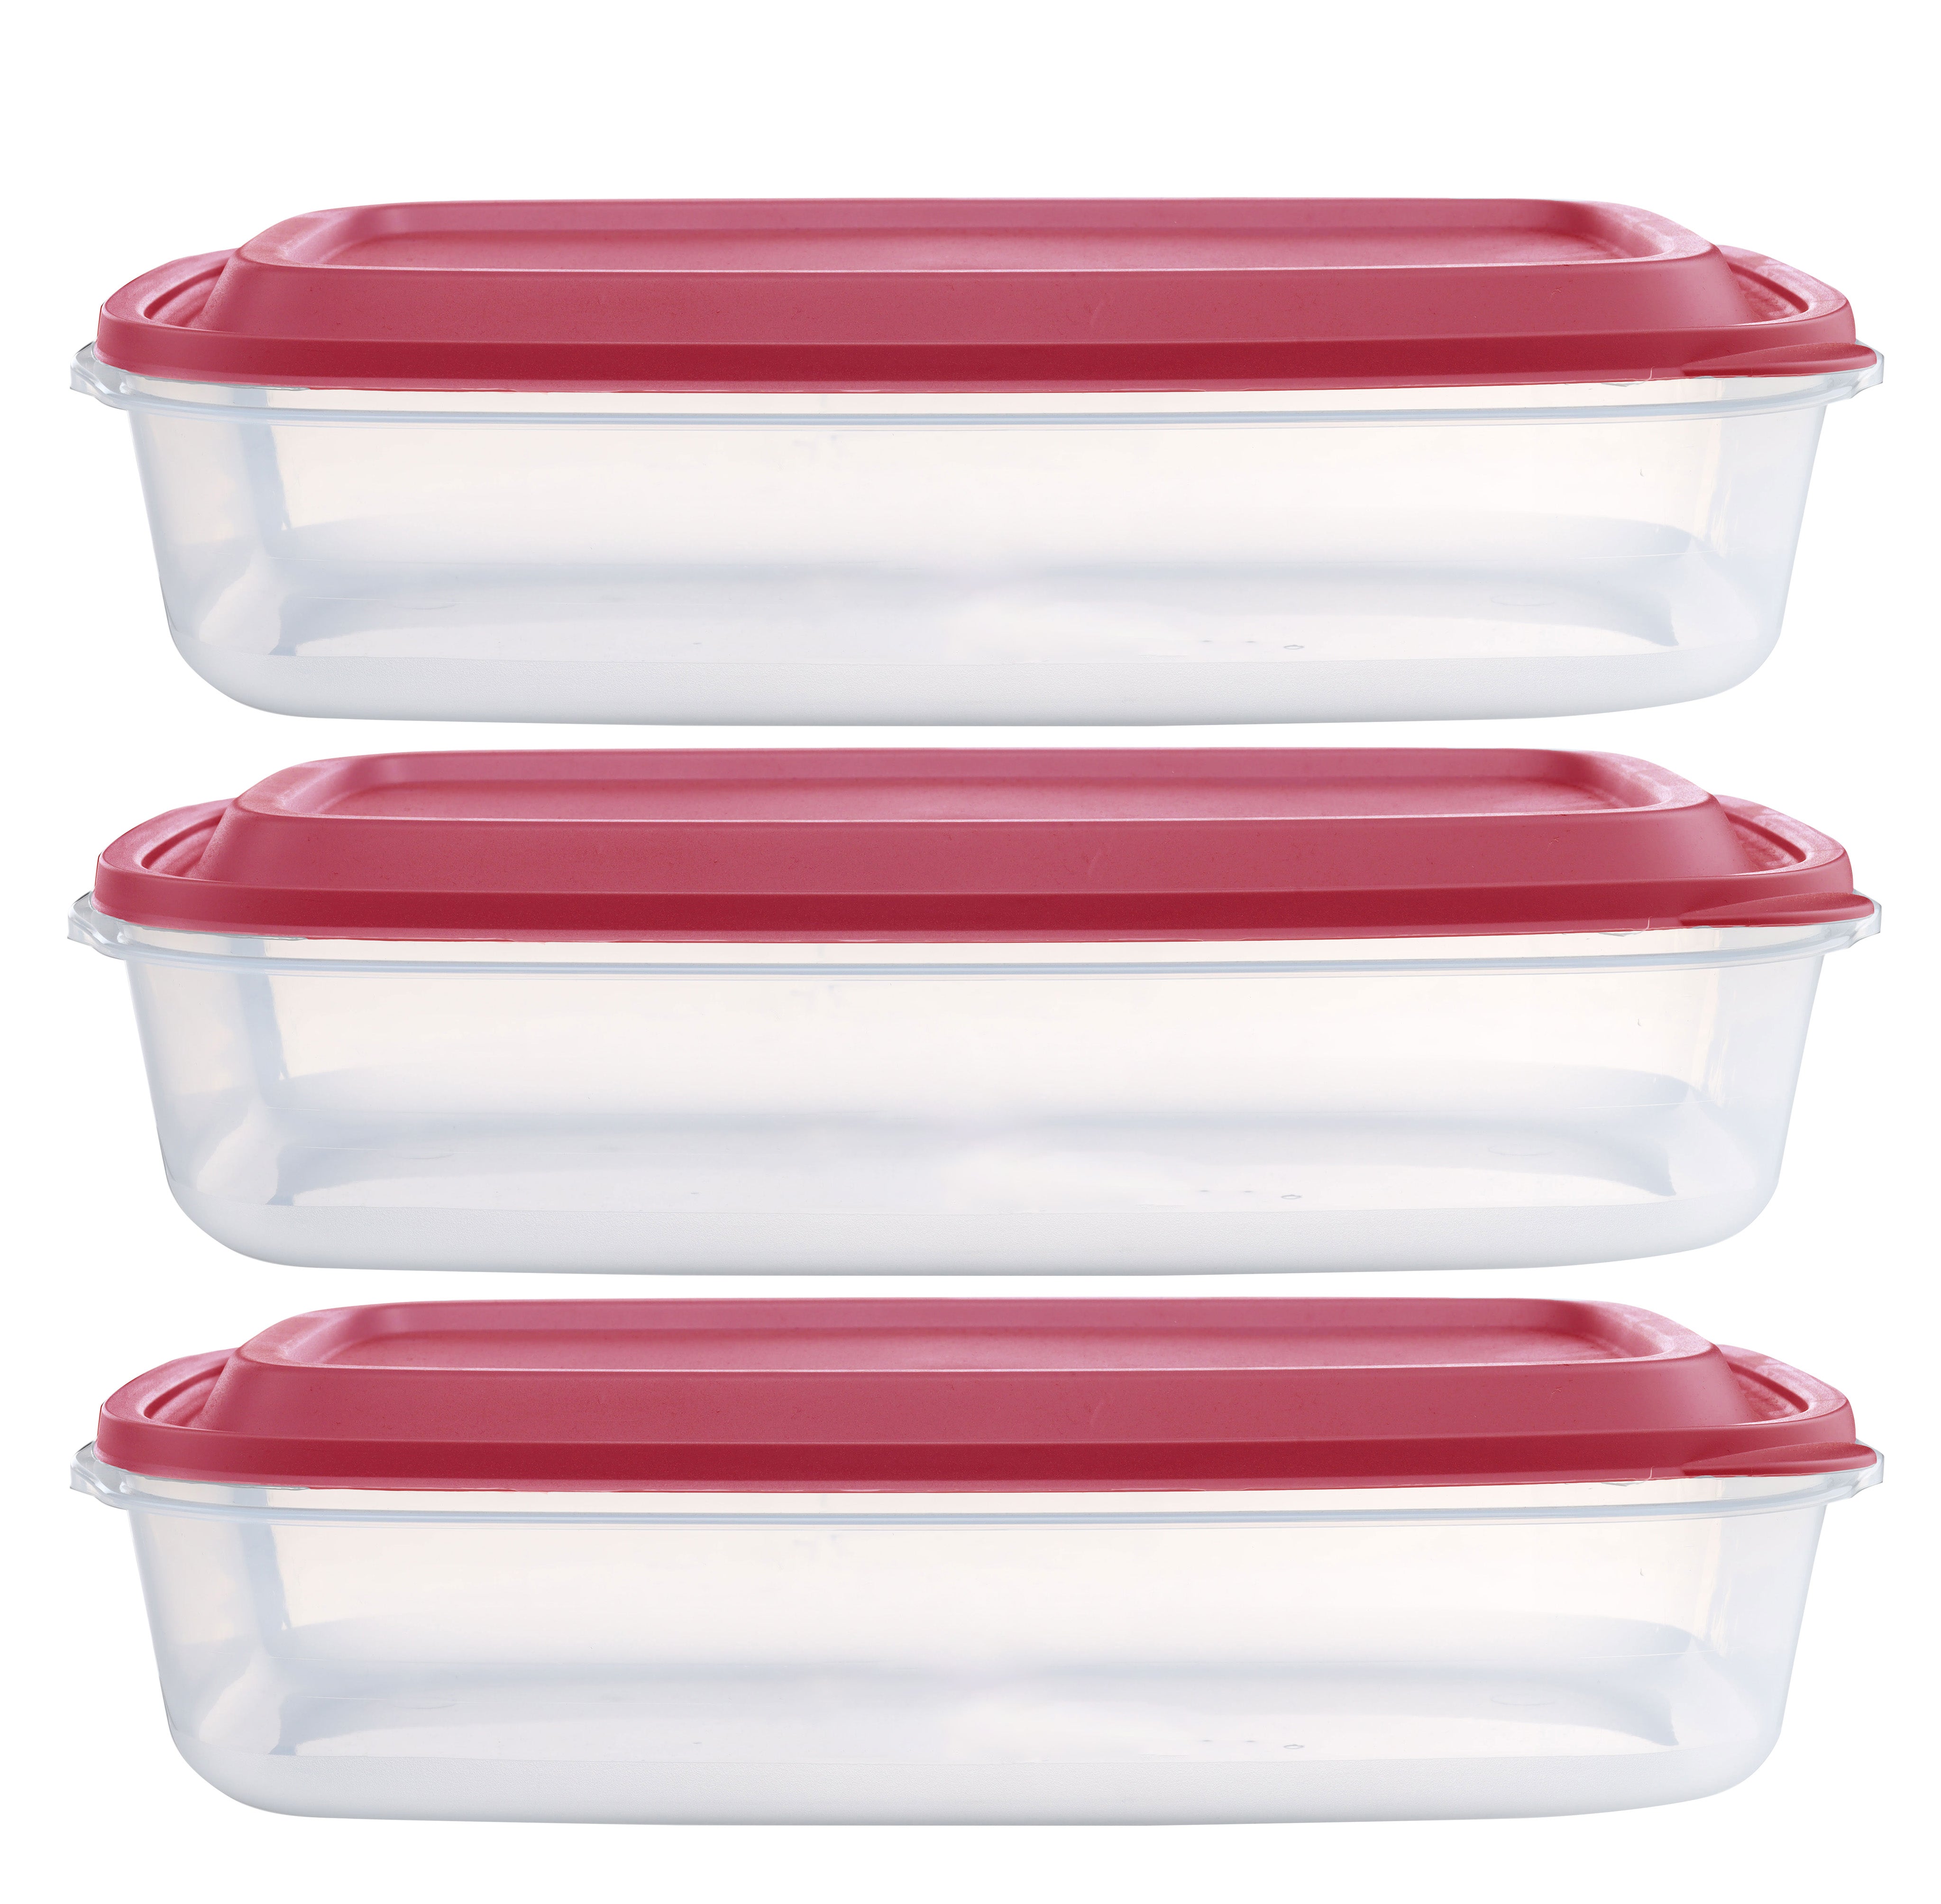 American Maid 24 Cup Rectangle Food Storage, Pack of 3